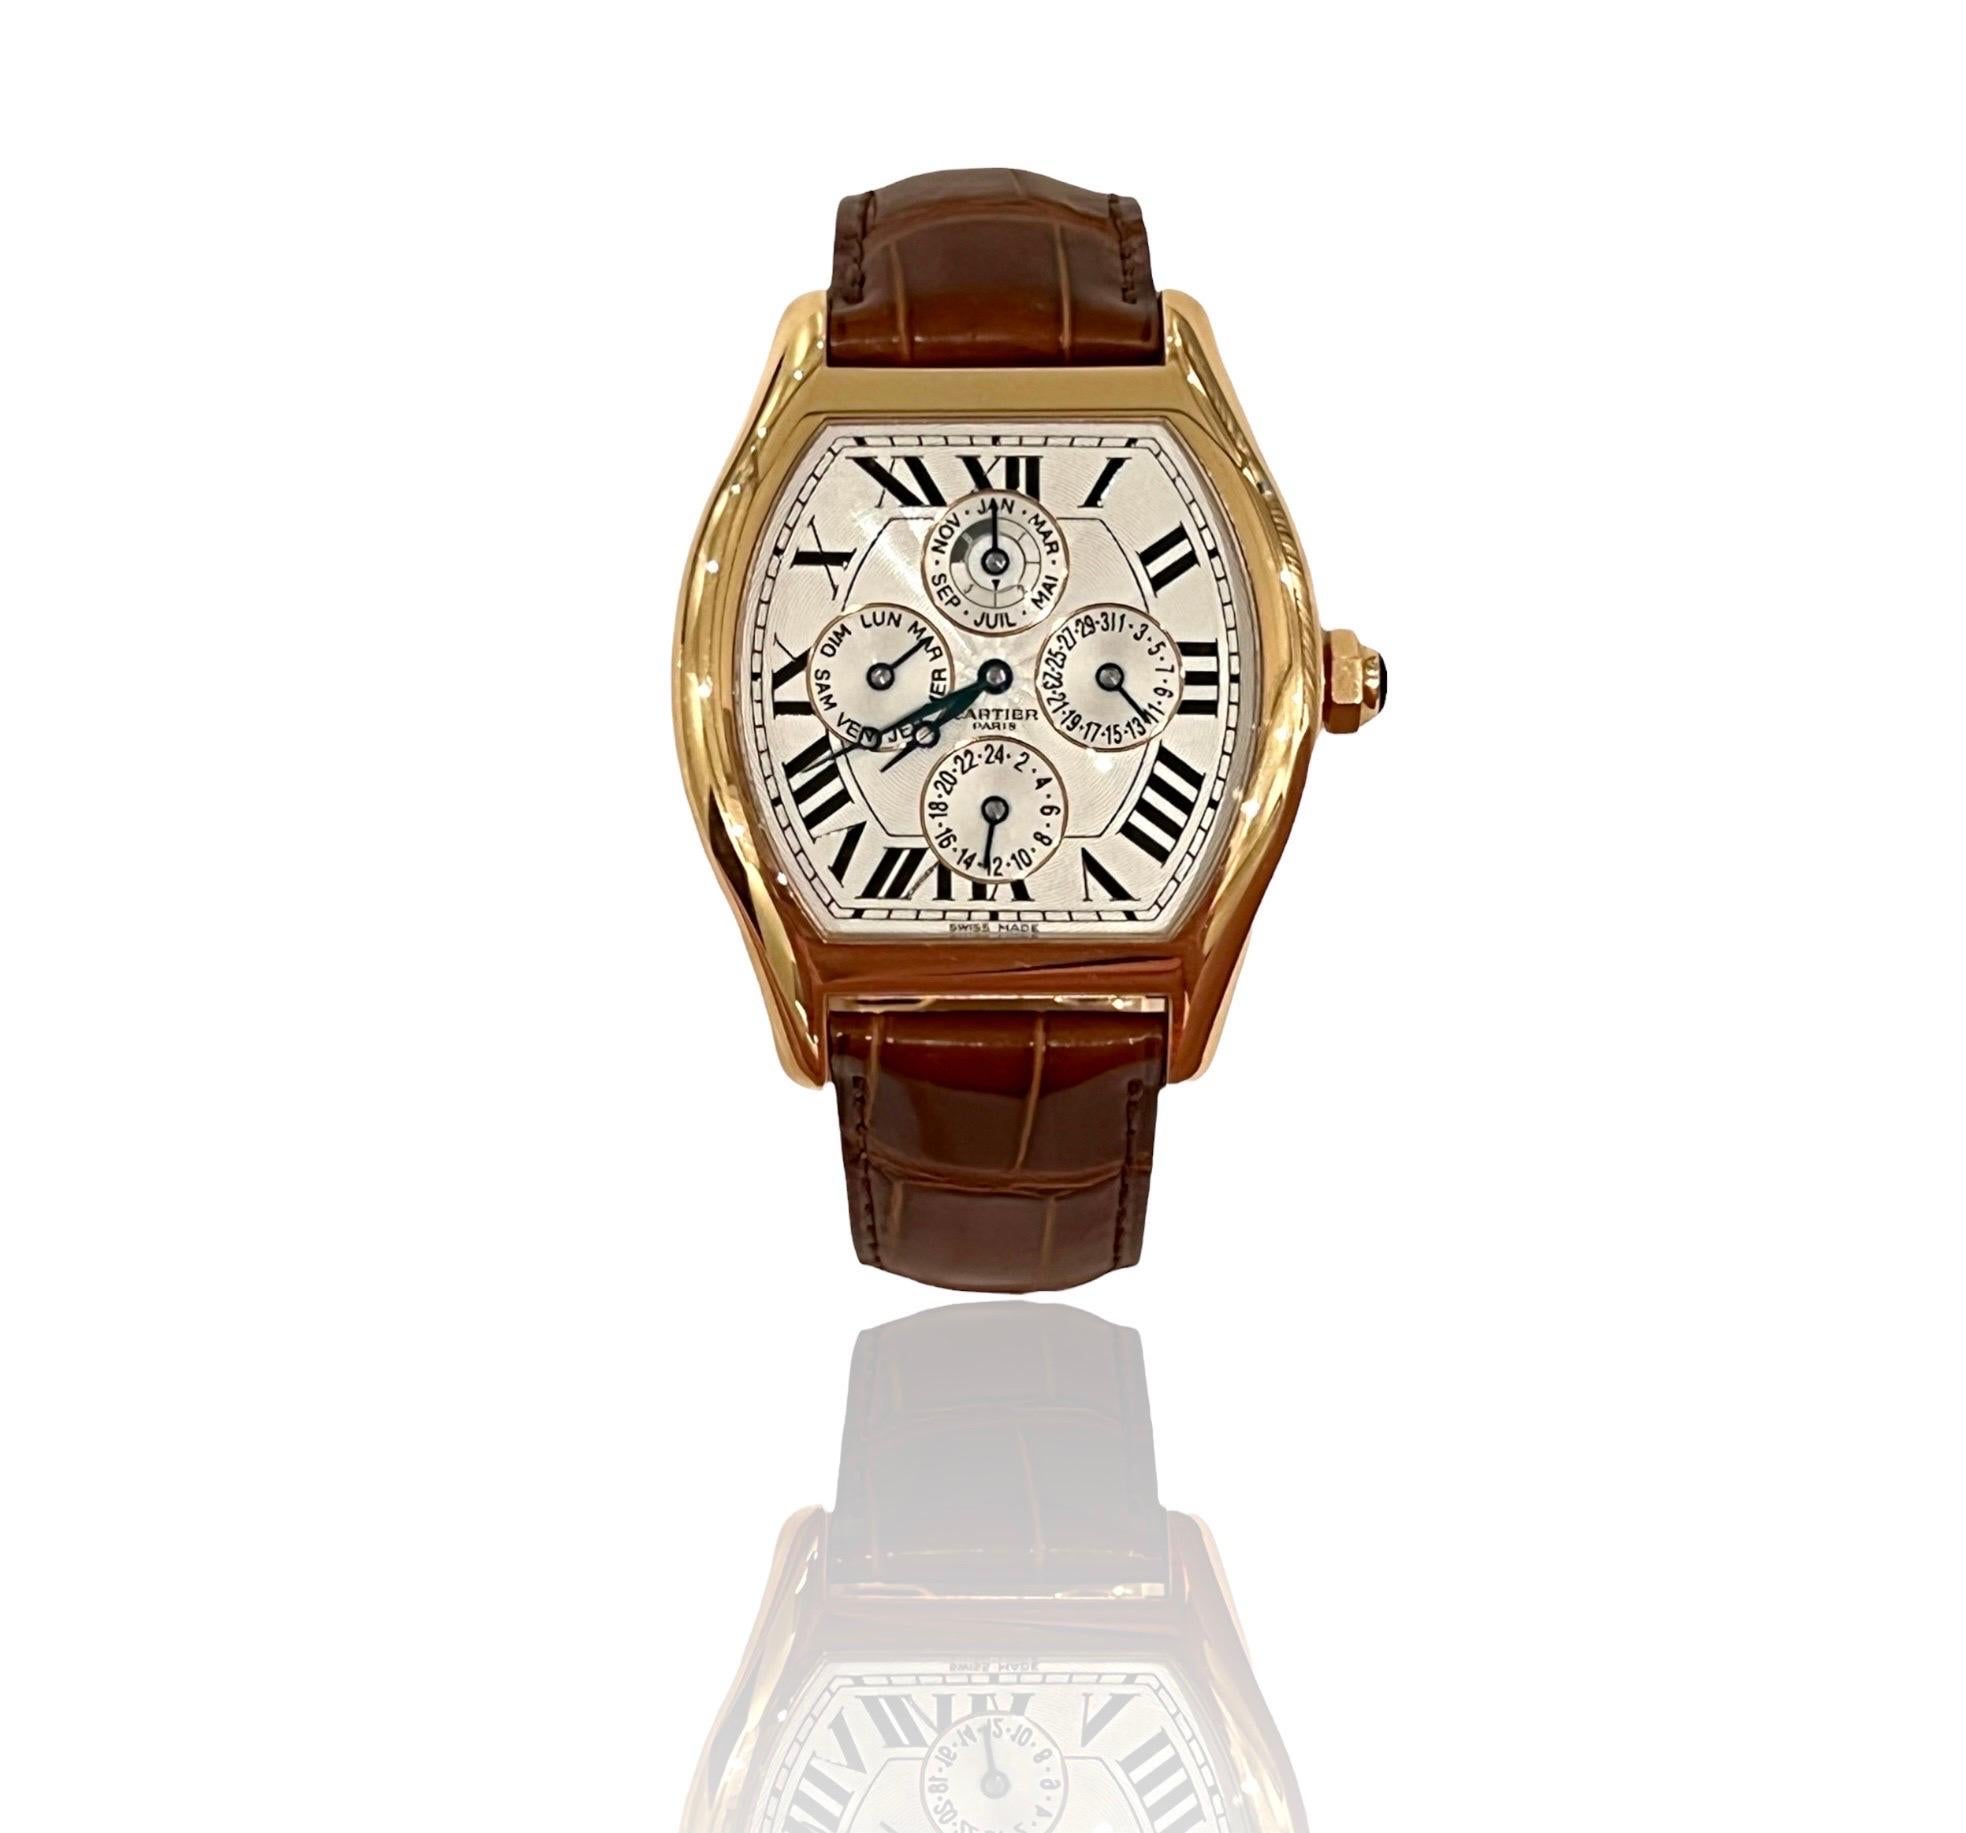 Rare CARTIER Tortue XL wrist watch
Limited, numbered edition, no longer available
From Cartier's special 